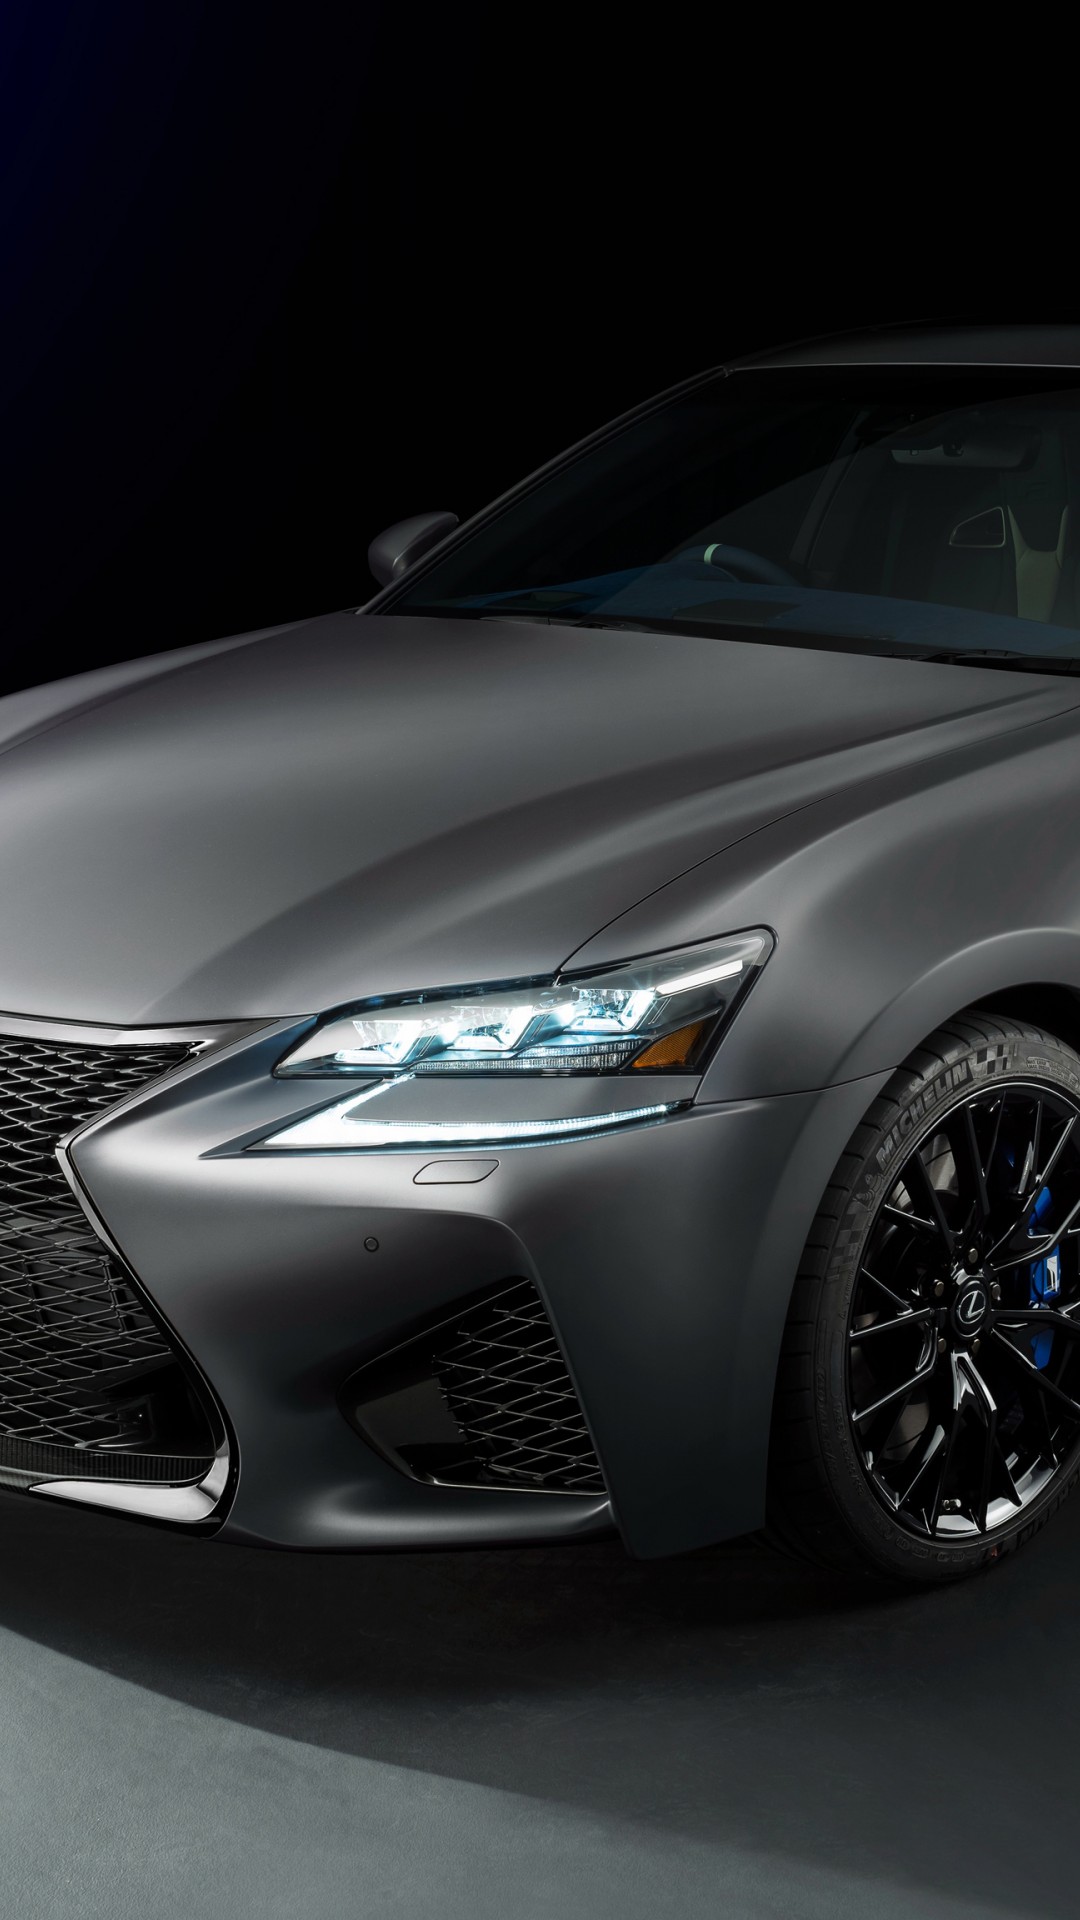 Download Lexus Gs F 10th Anniversary Hd Wallpaper For Desktop And Mobiles Iphone 6 6s Plus Hd Wallpaper Wallpapers Net